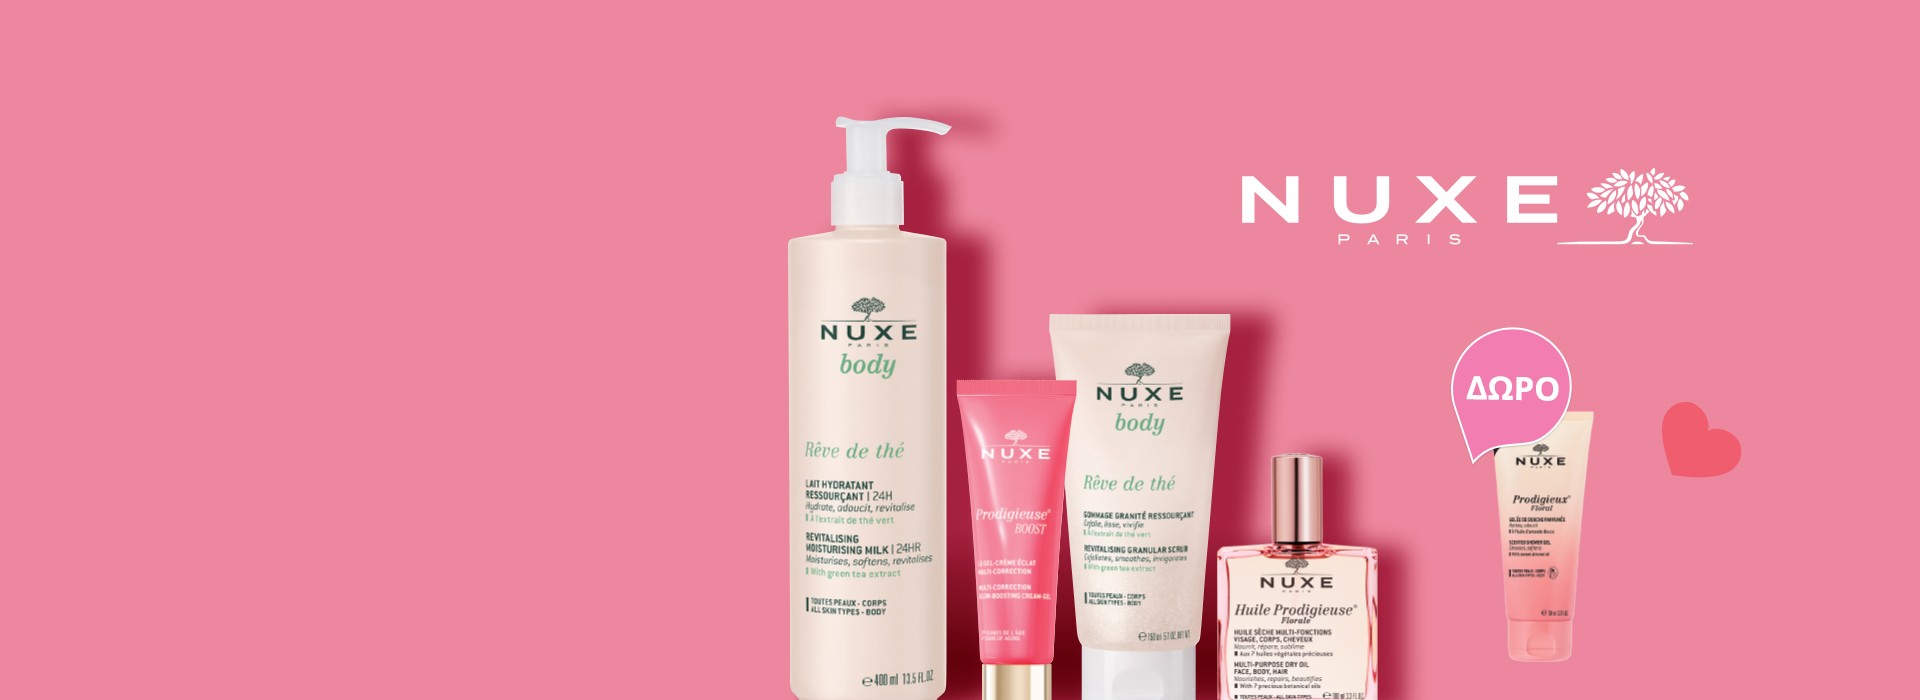 With every Nuxe purchase of €30 or more,